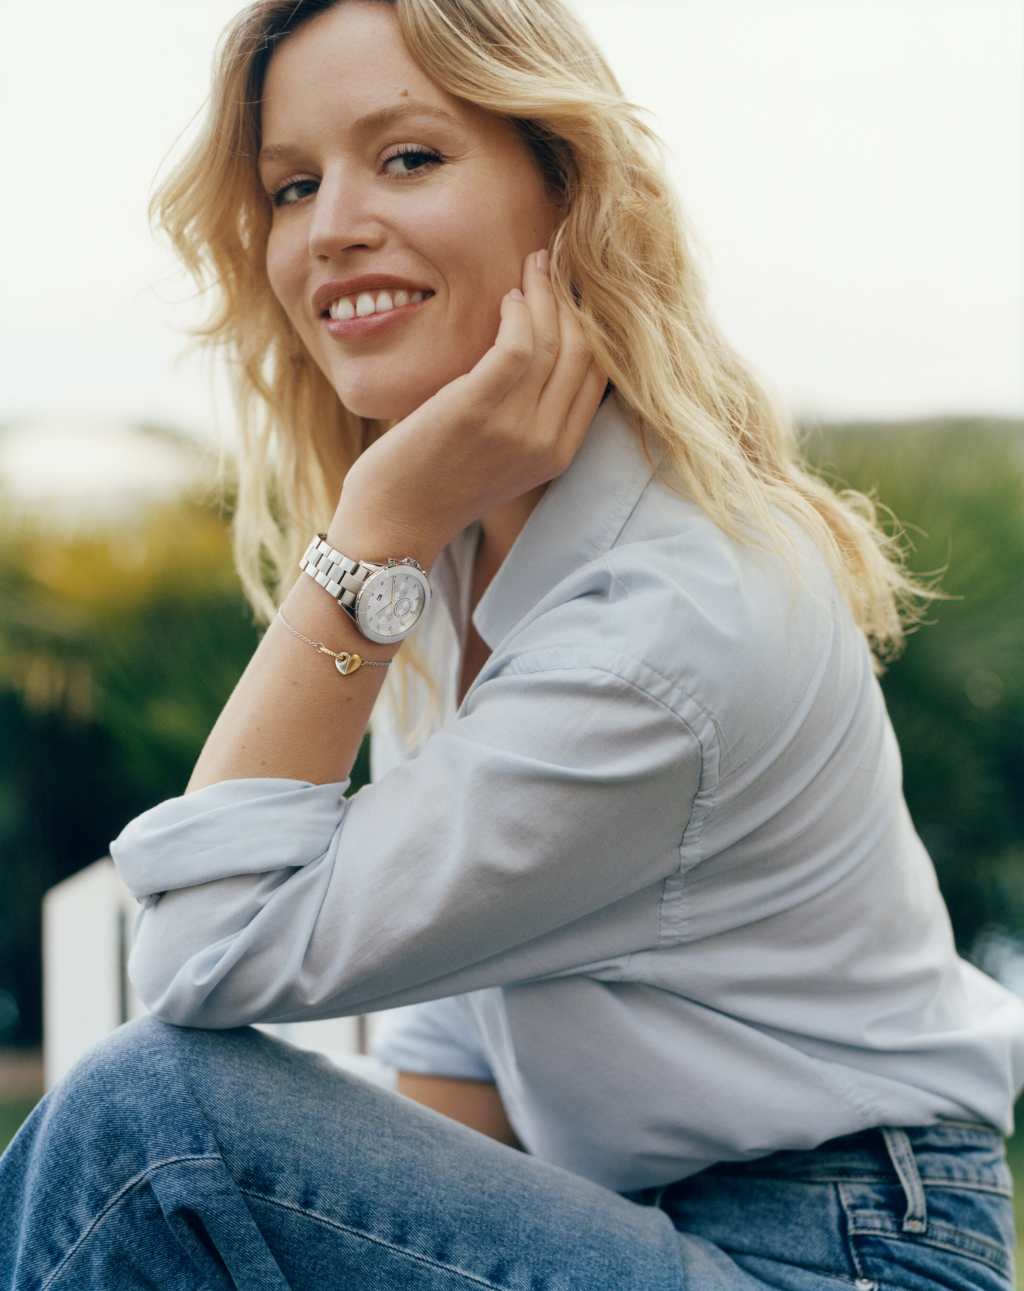 Tommy Hilfiger Reveals Georgia May Jager as the Ambassador for the Watch and Jewelry Collection for Summer 2024